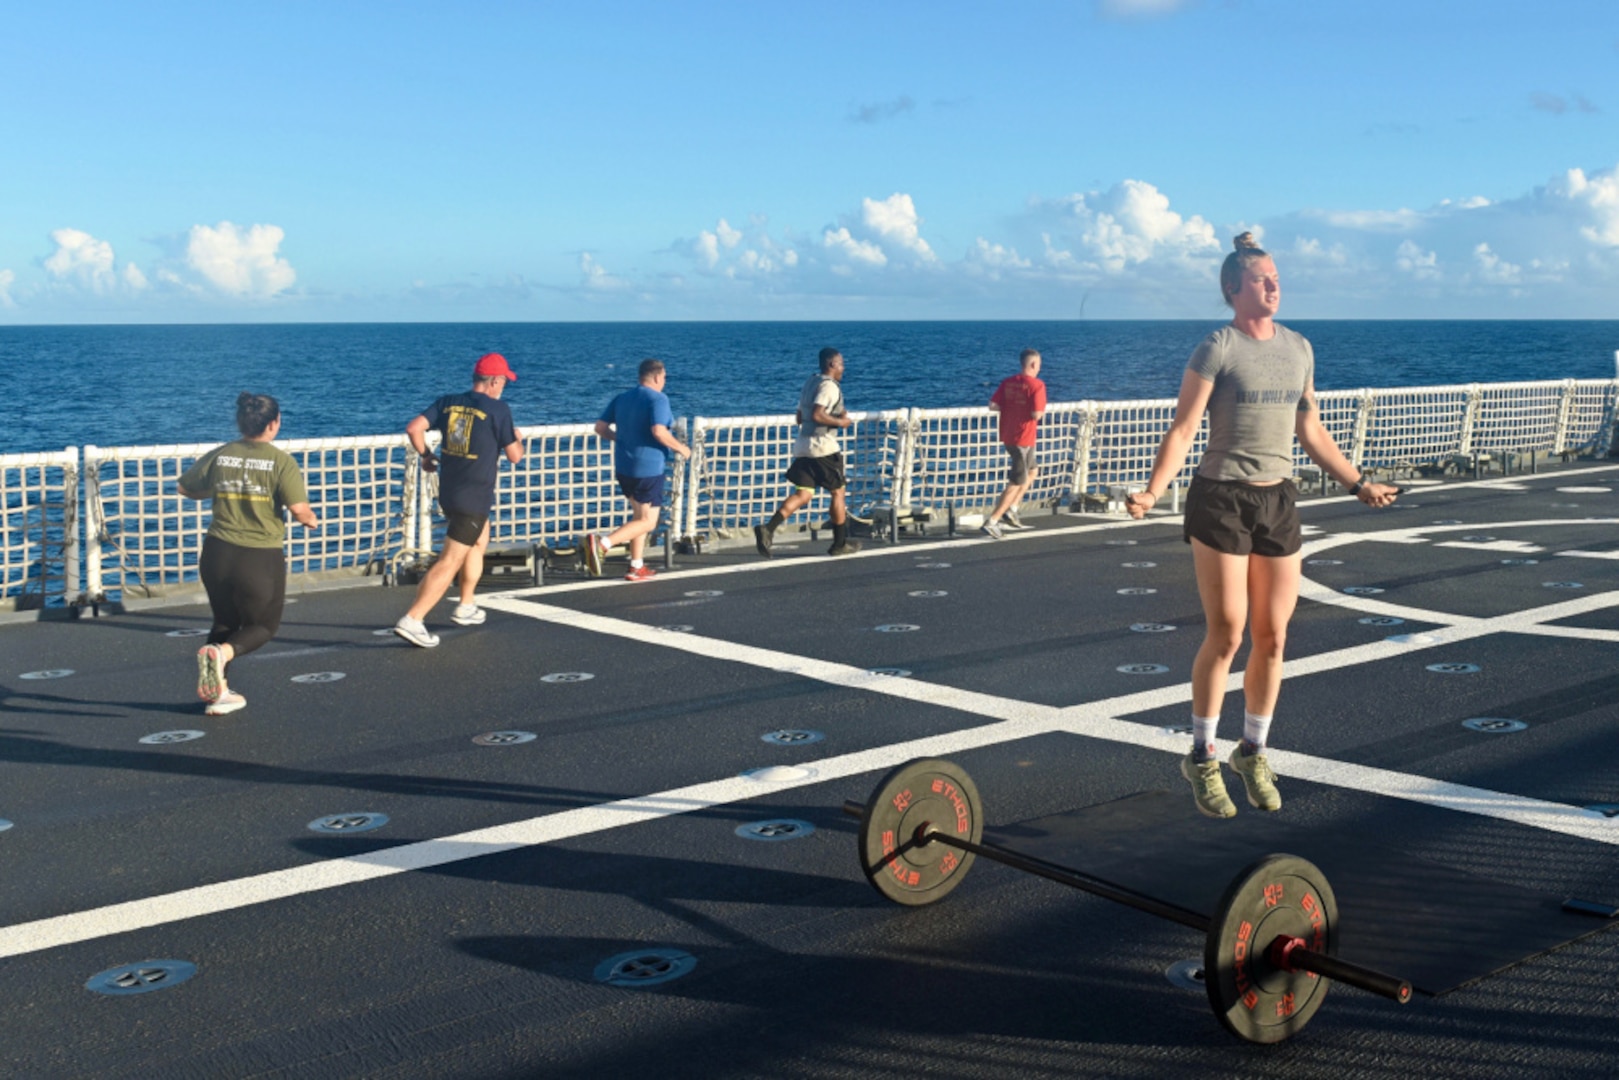 Members of the USCGC Stone (WMSL 758) conduct a regular workout while at sea in the South Atlantic on Jan. 19, 2021. Maintaining physical fitness is key to performing operations safely. (U.S. Coast Guard photo by Petty Officer 3rd Class John Hightower)